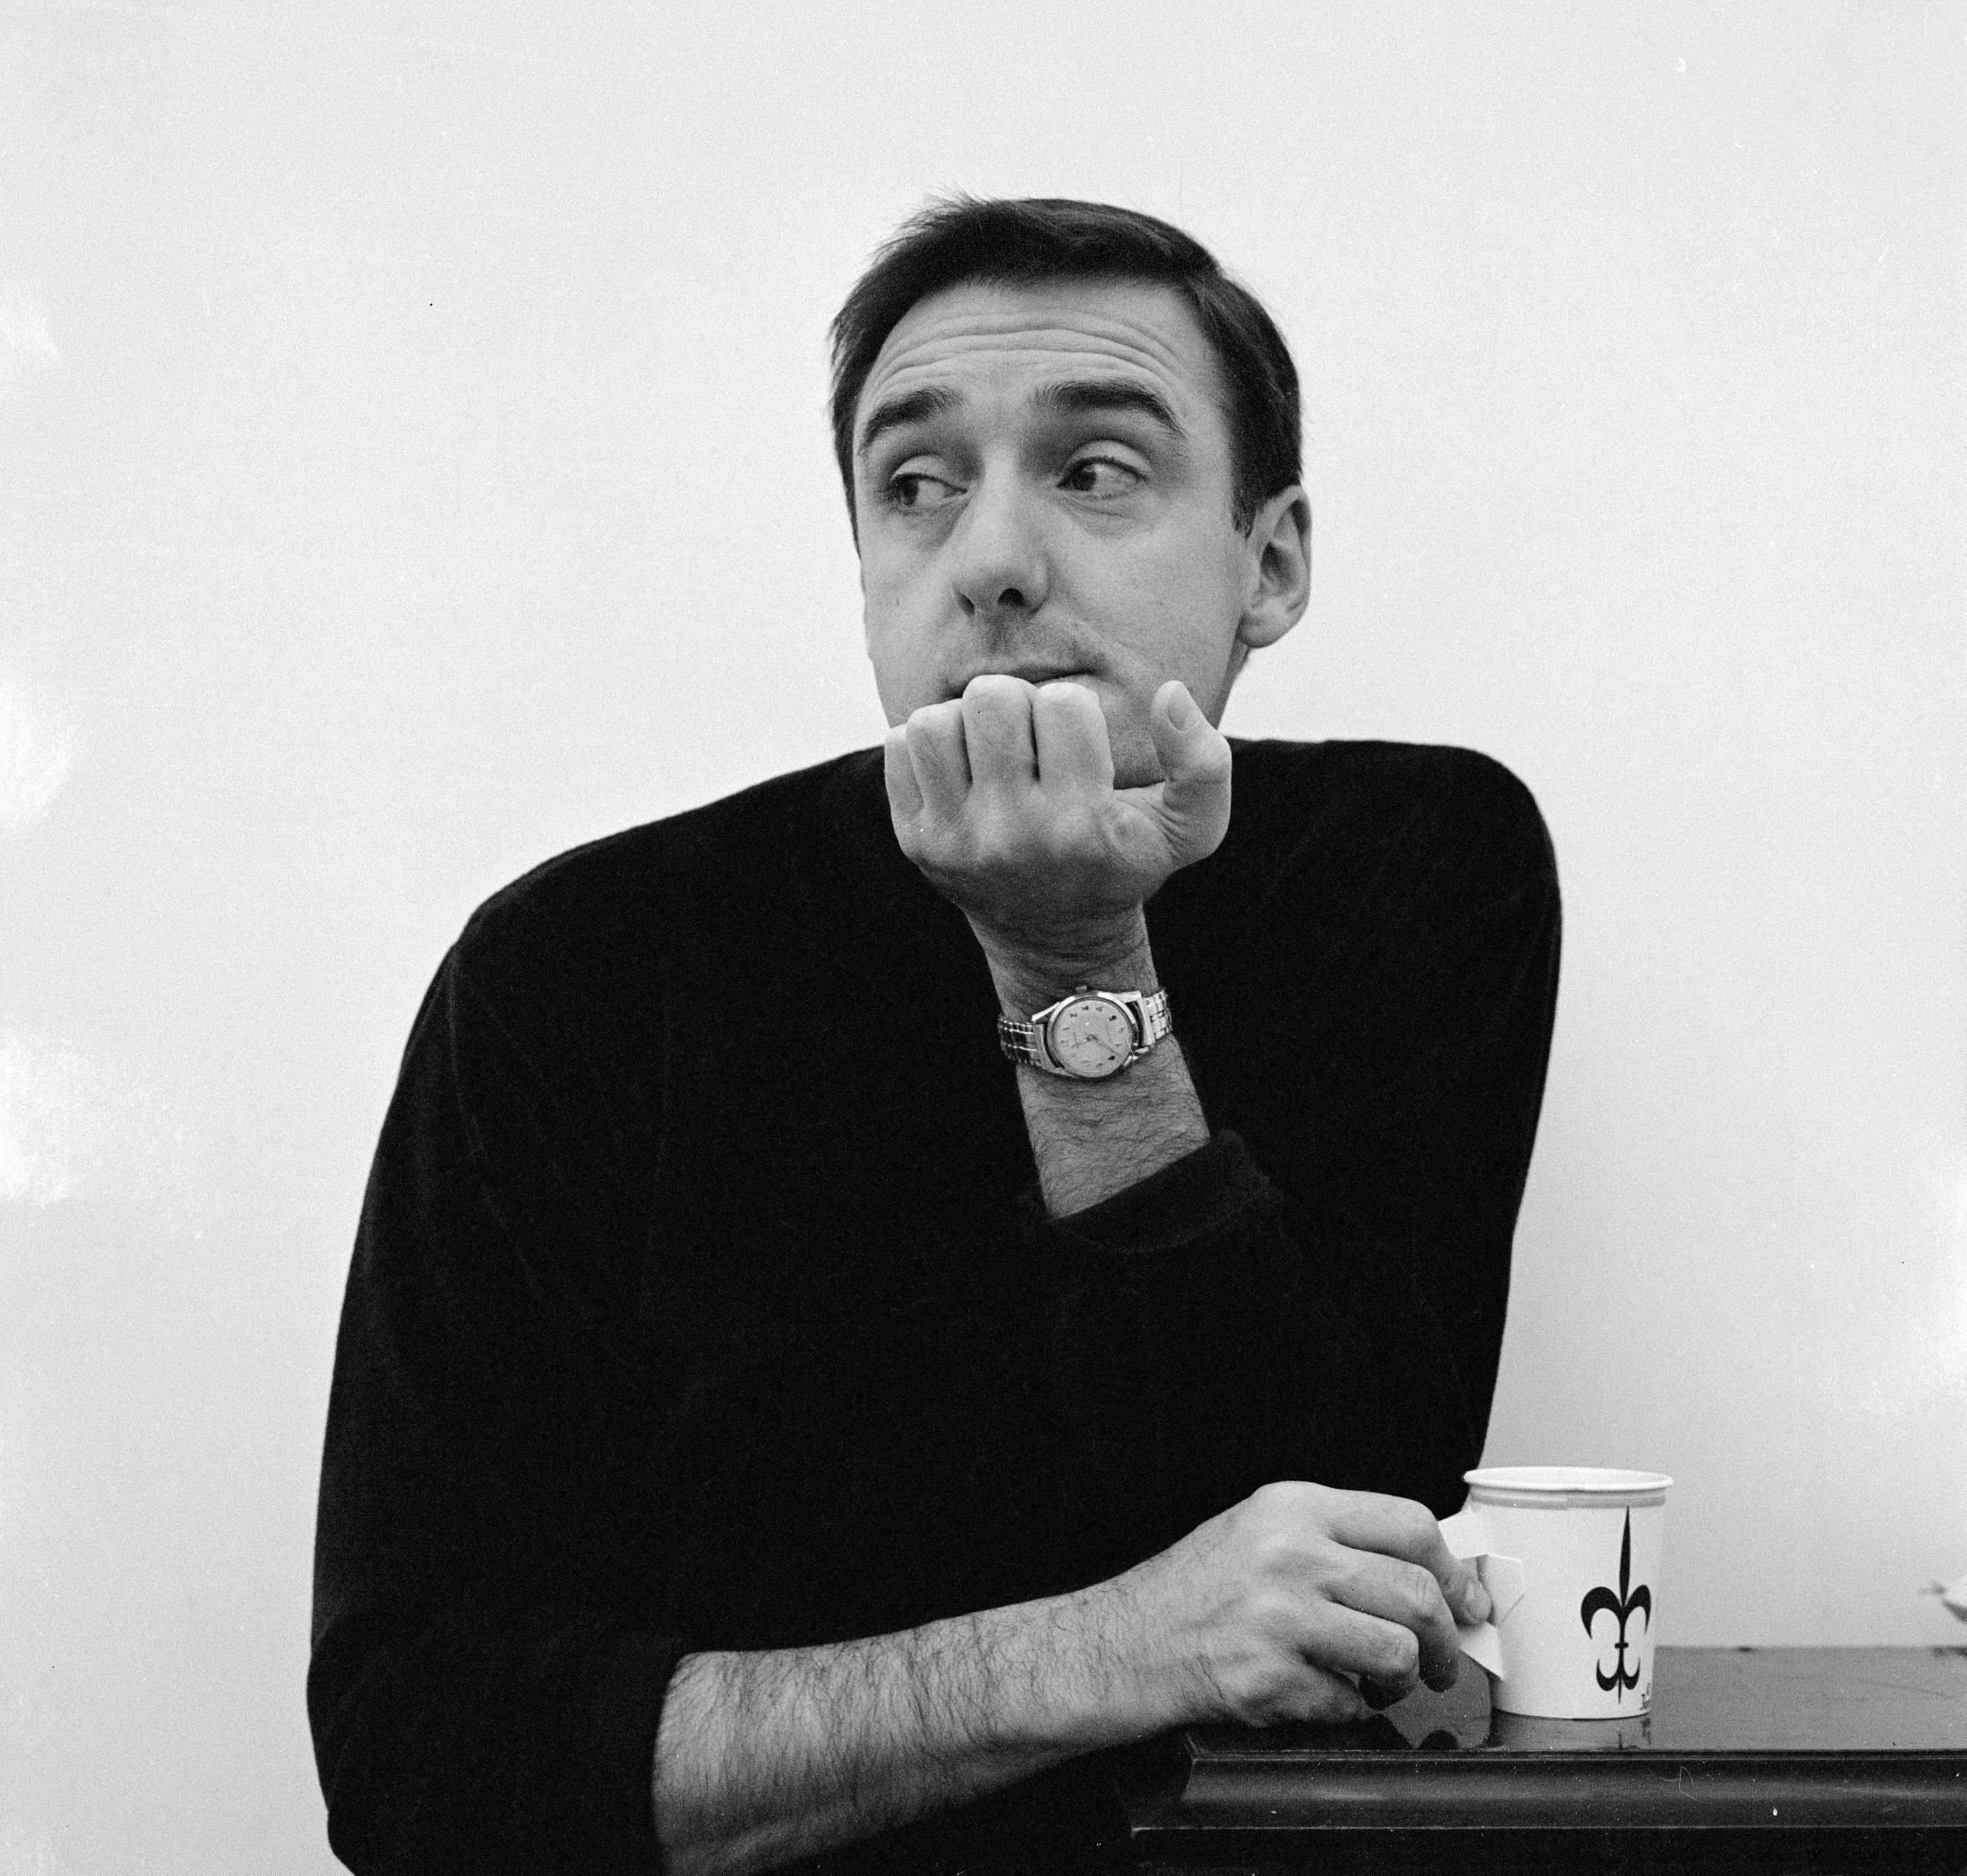 Jim Nabors relaxes over a cup of coffee while at a rehearsal for an upcoming show on September 6, 1965. | Source: CBS Photo Archive/Getty Images